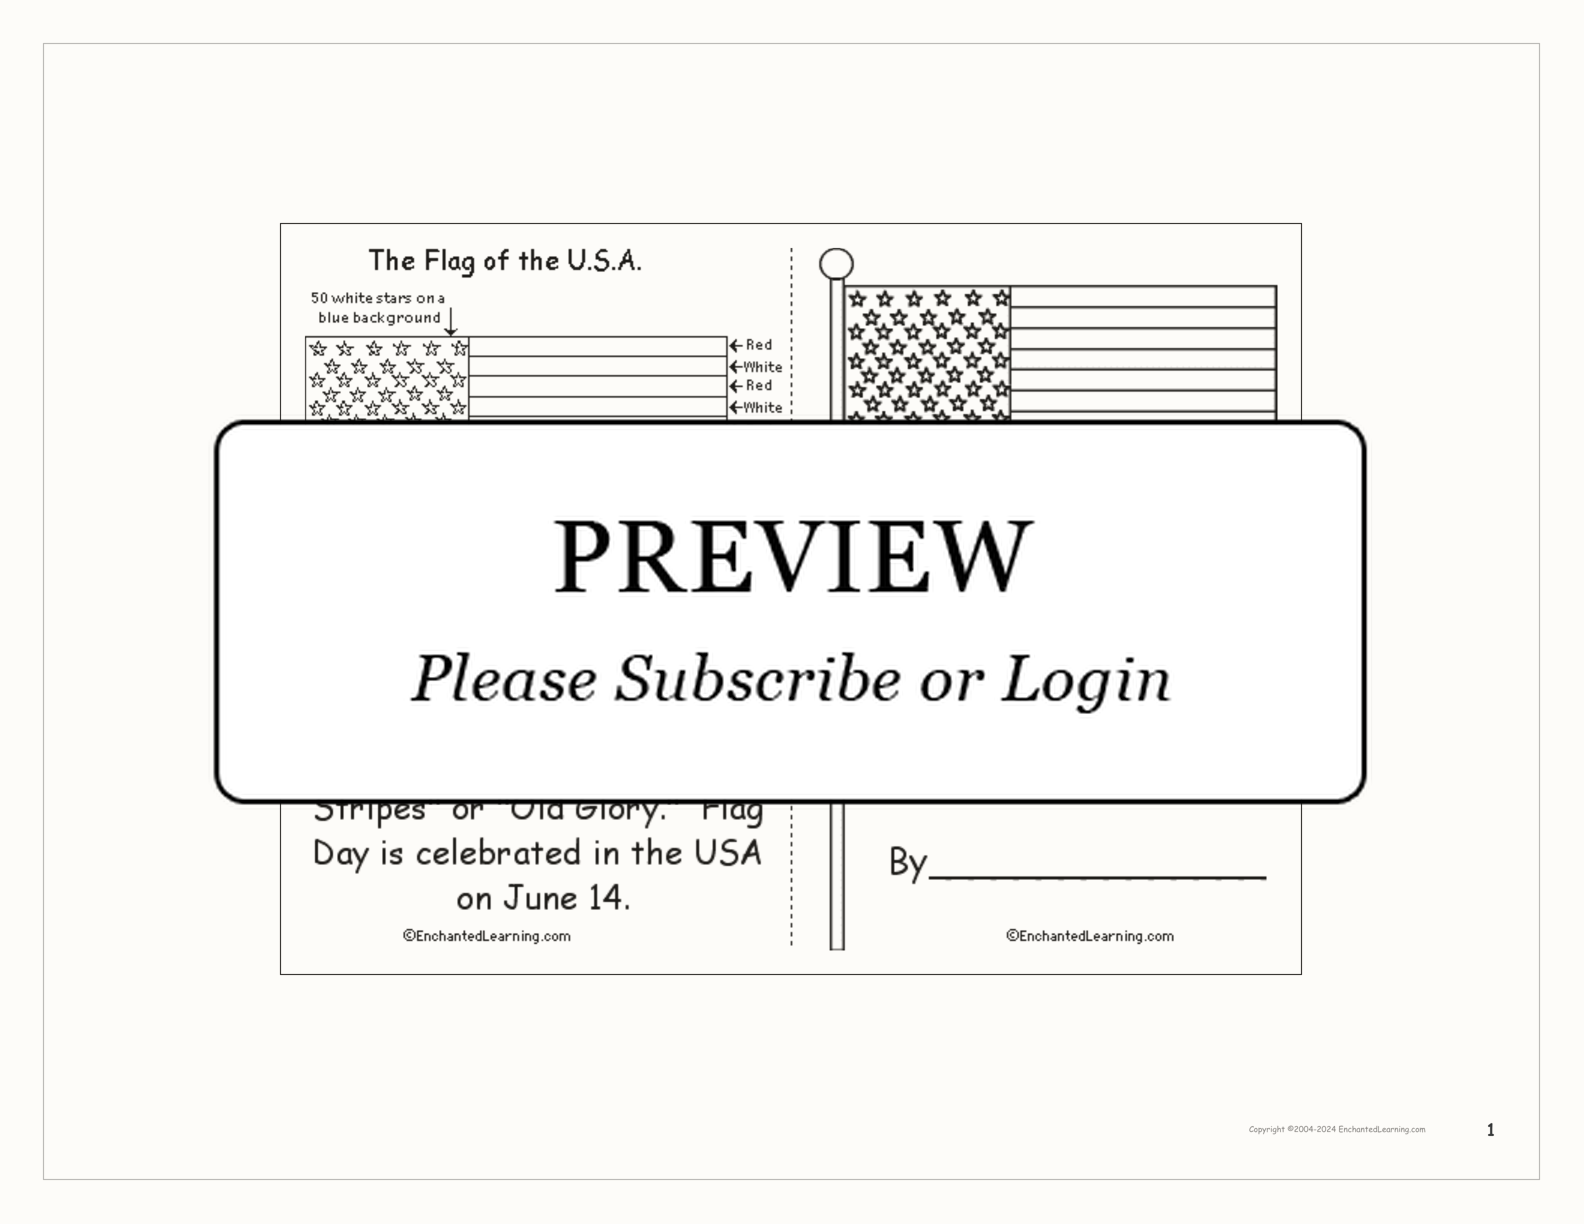 'The Flag of the USA' Book interactive printout page 1